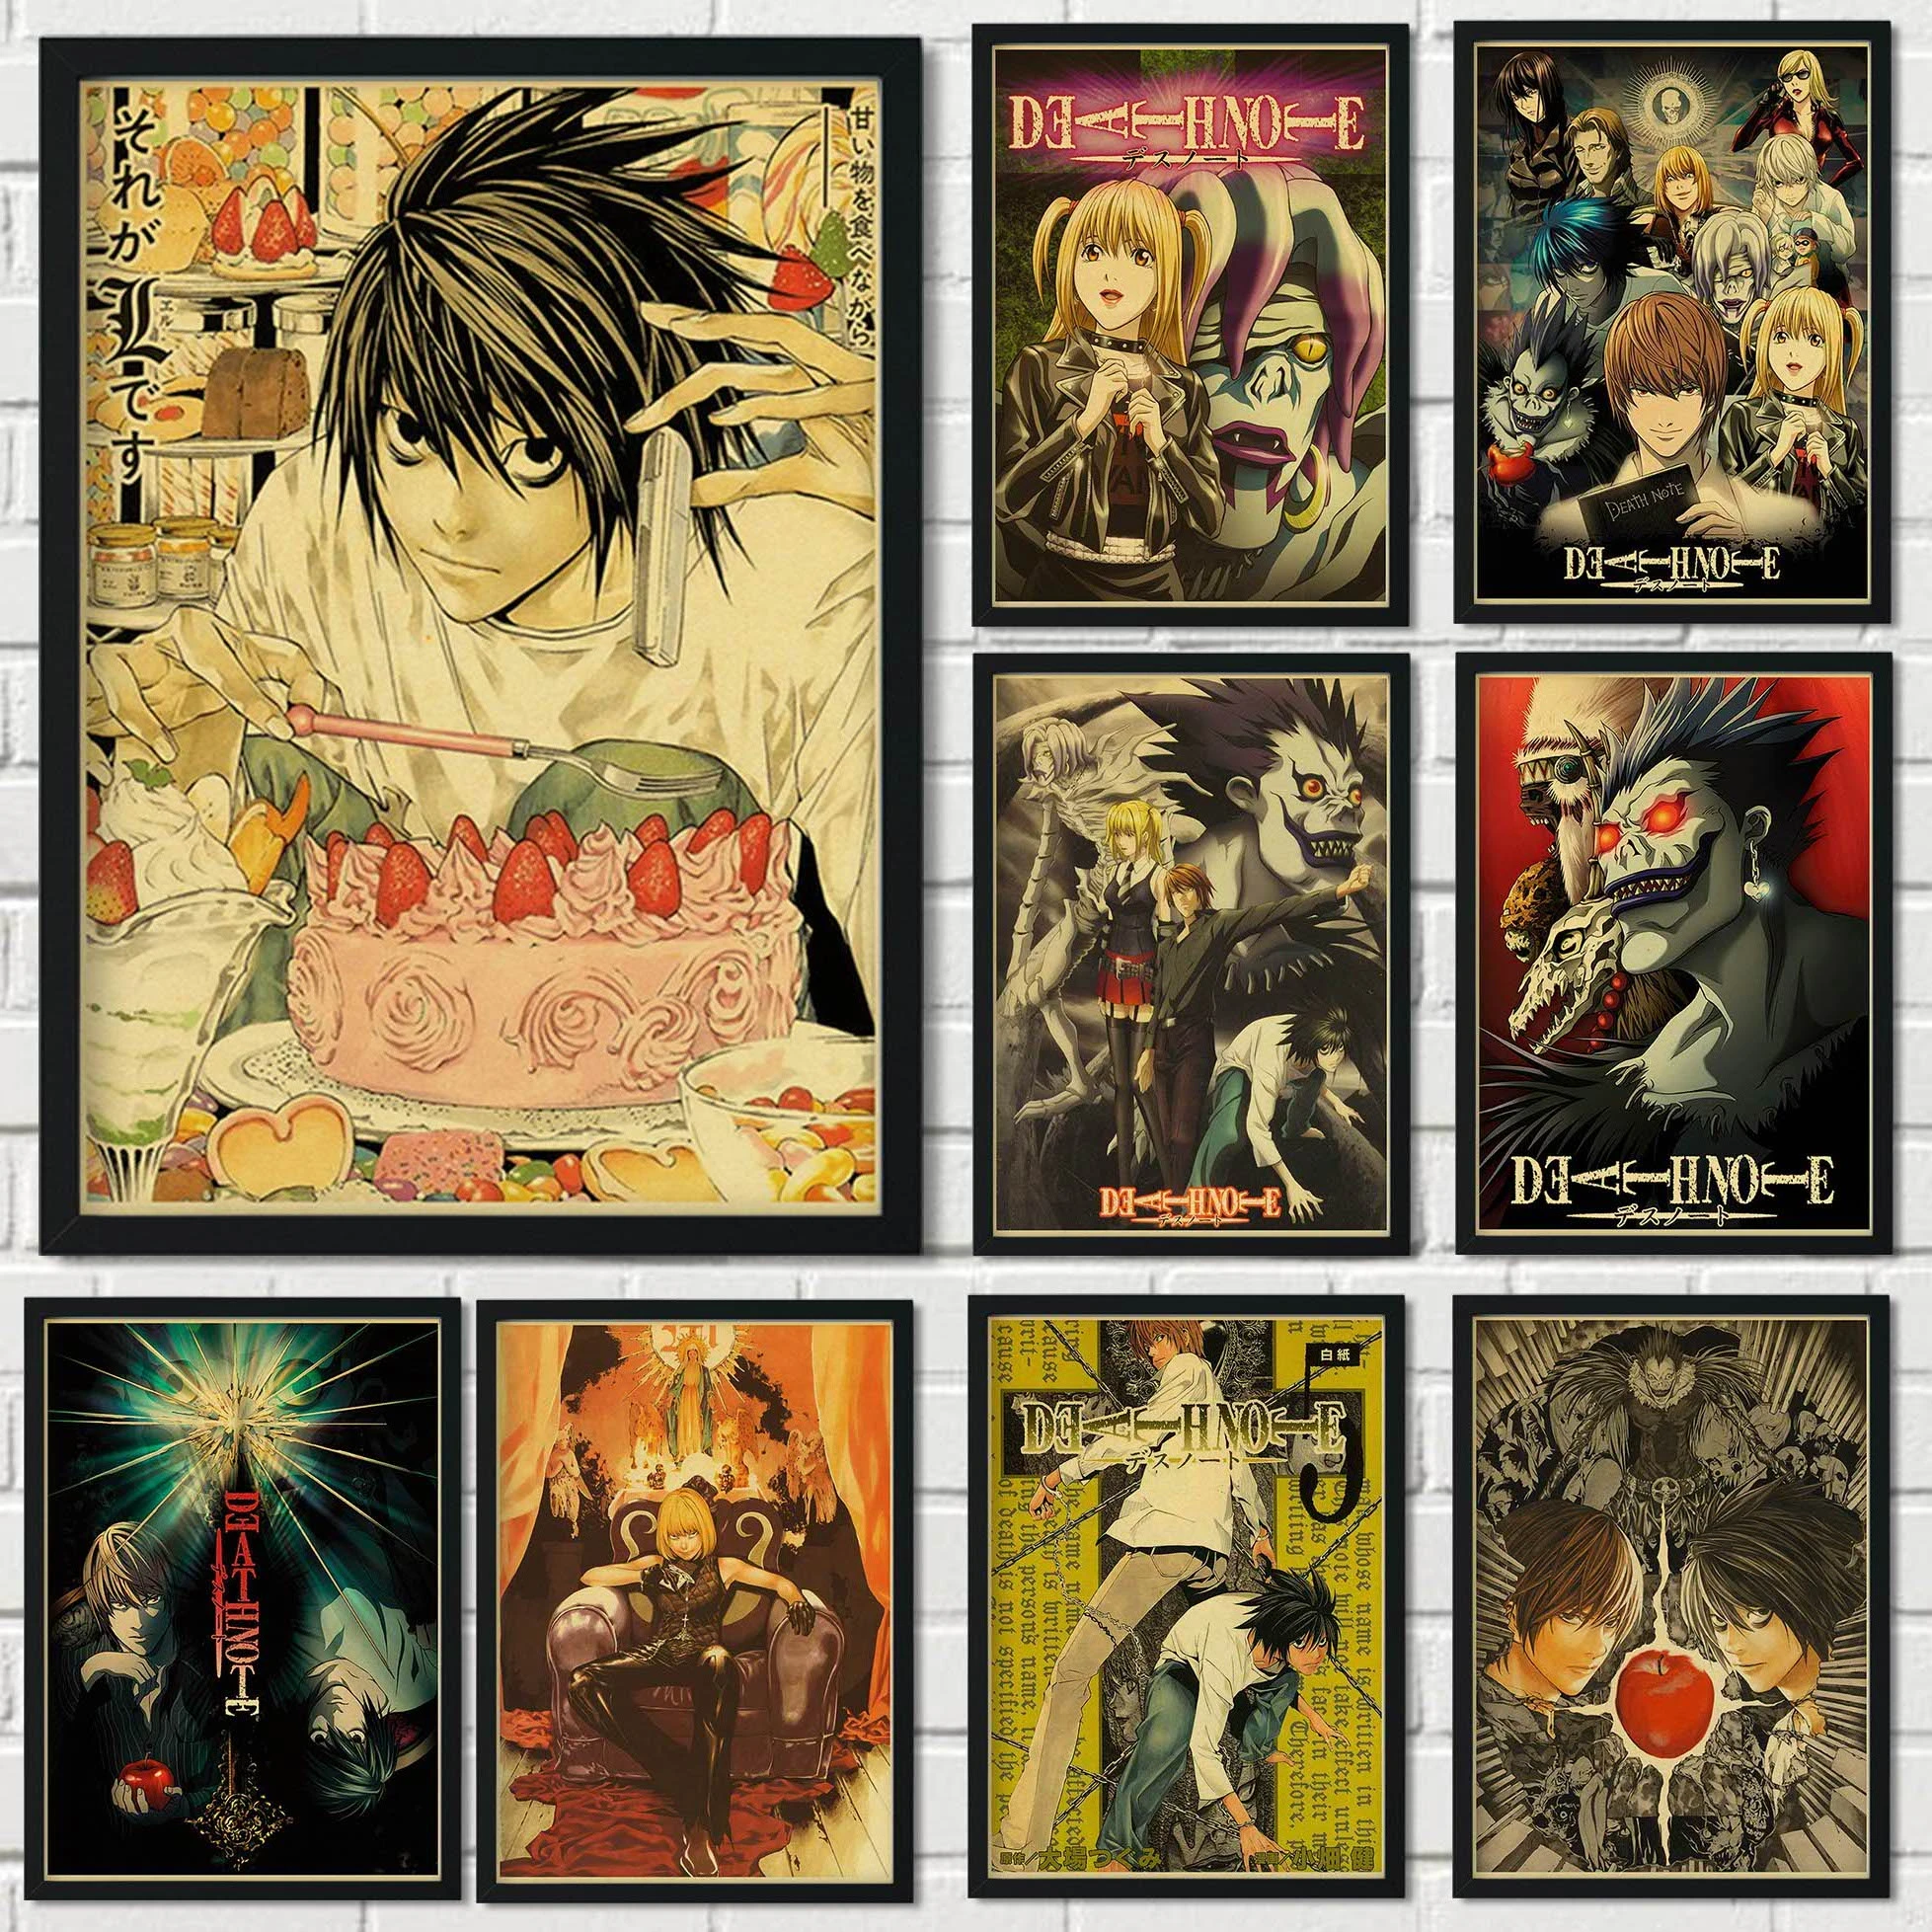 HD classic Japanese anime death note family wall decoration prints wall stickers retro style bar children's room poster o233